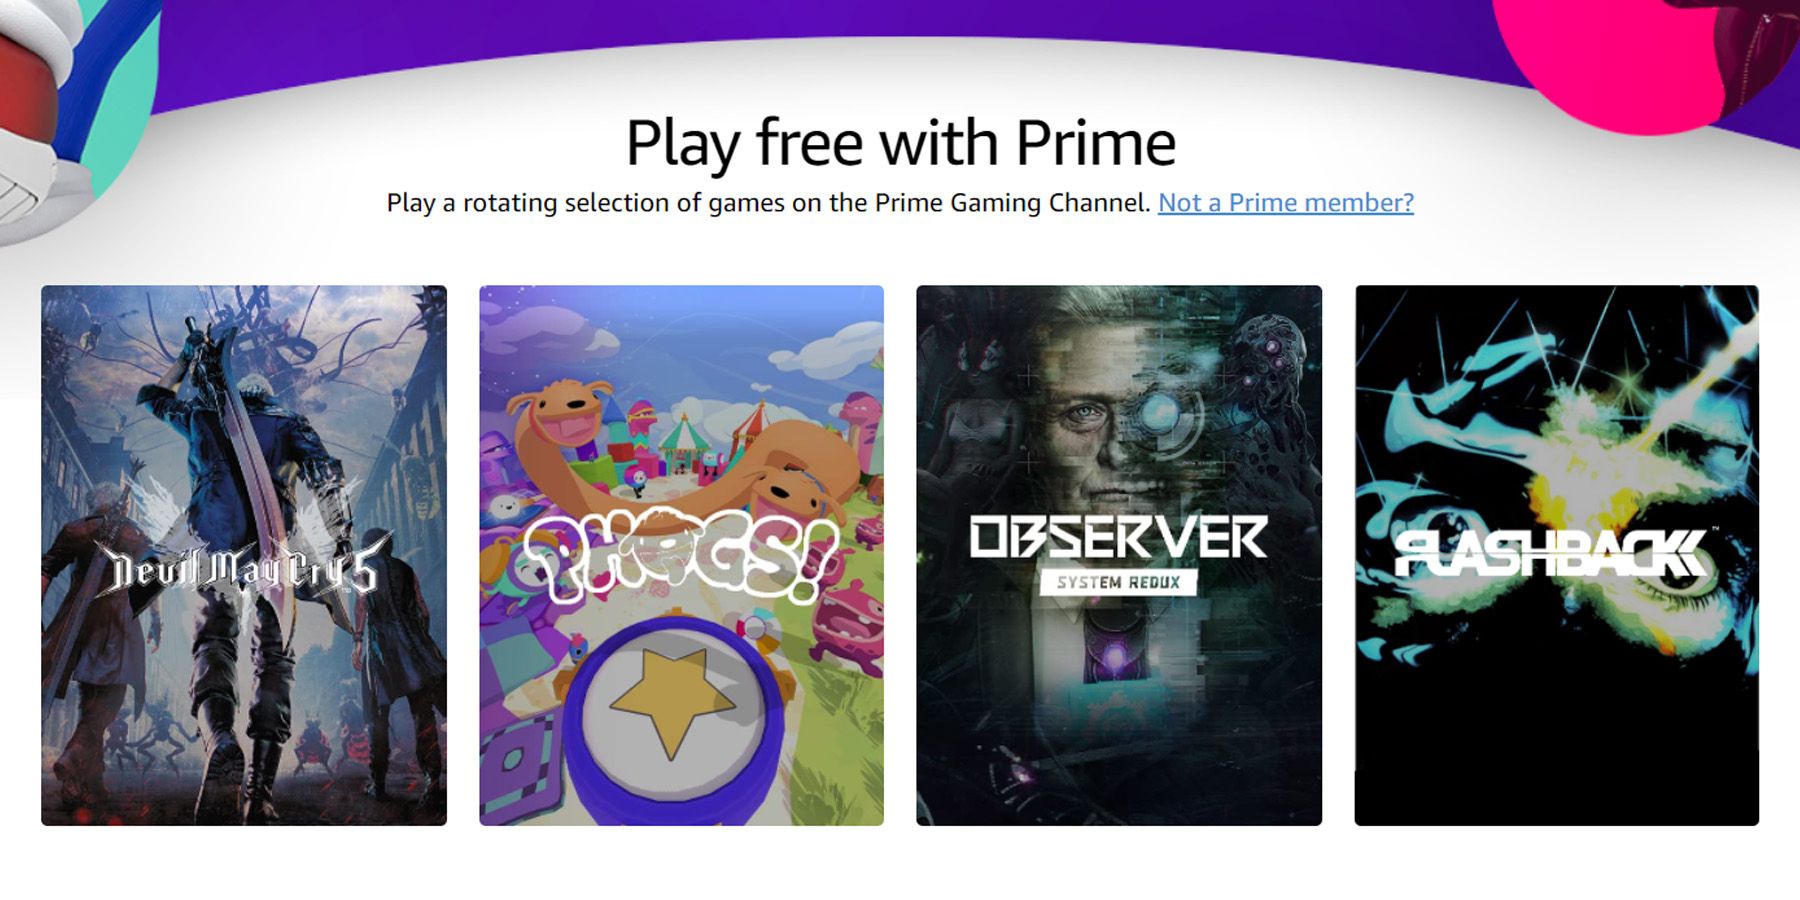 Previously Free Games